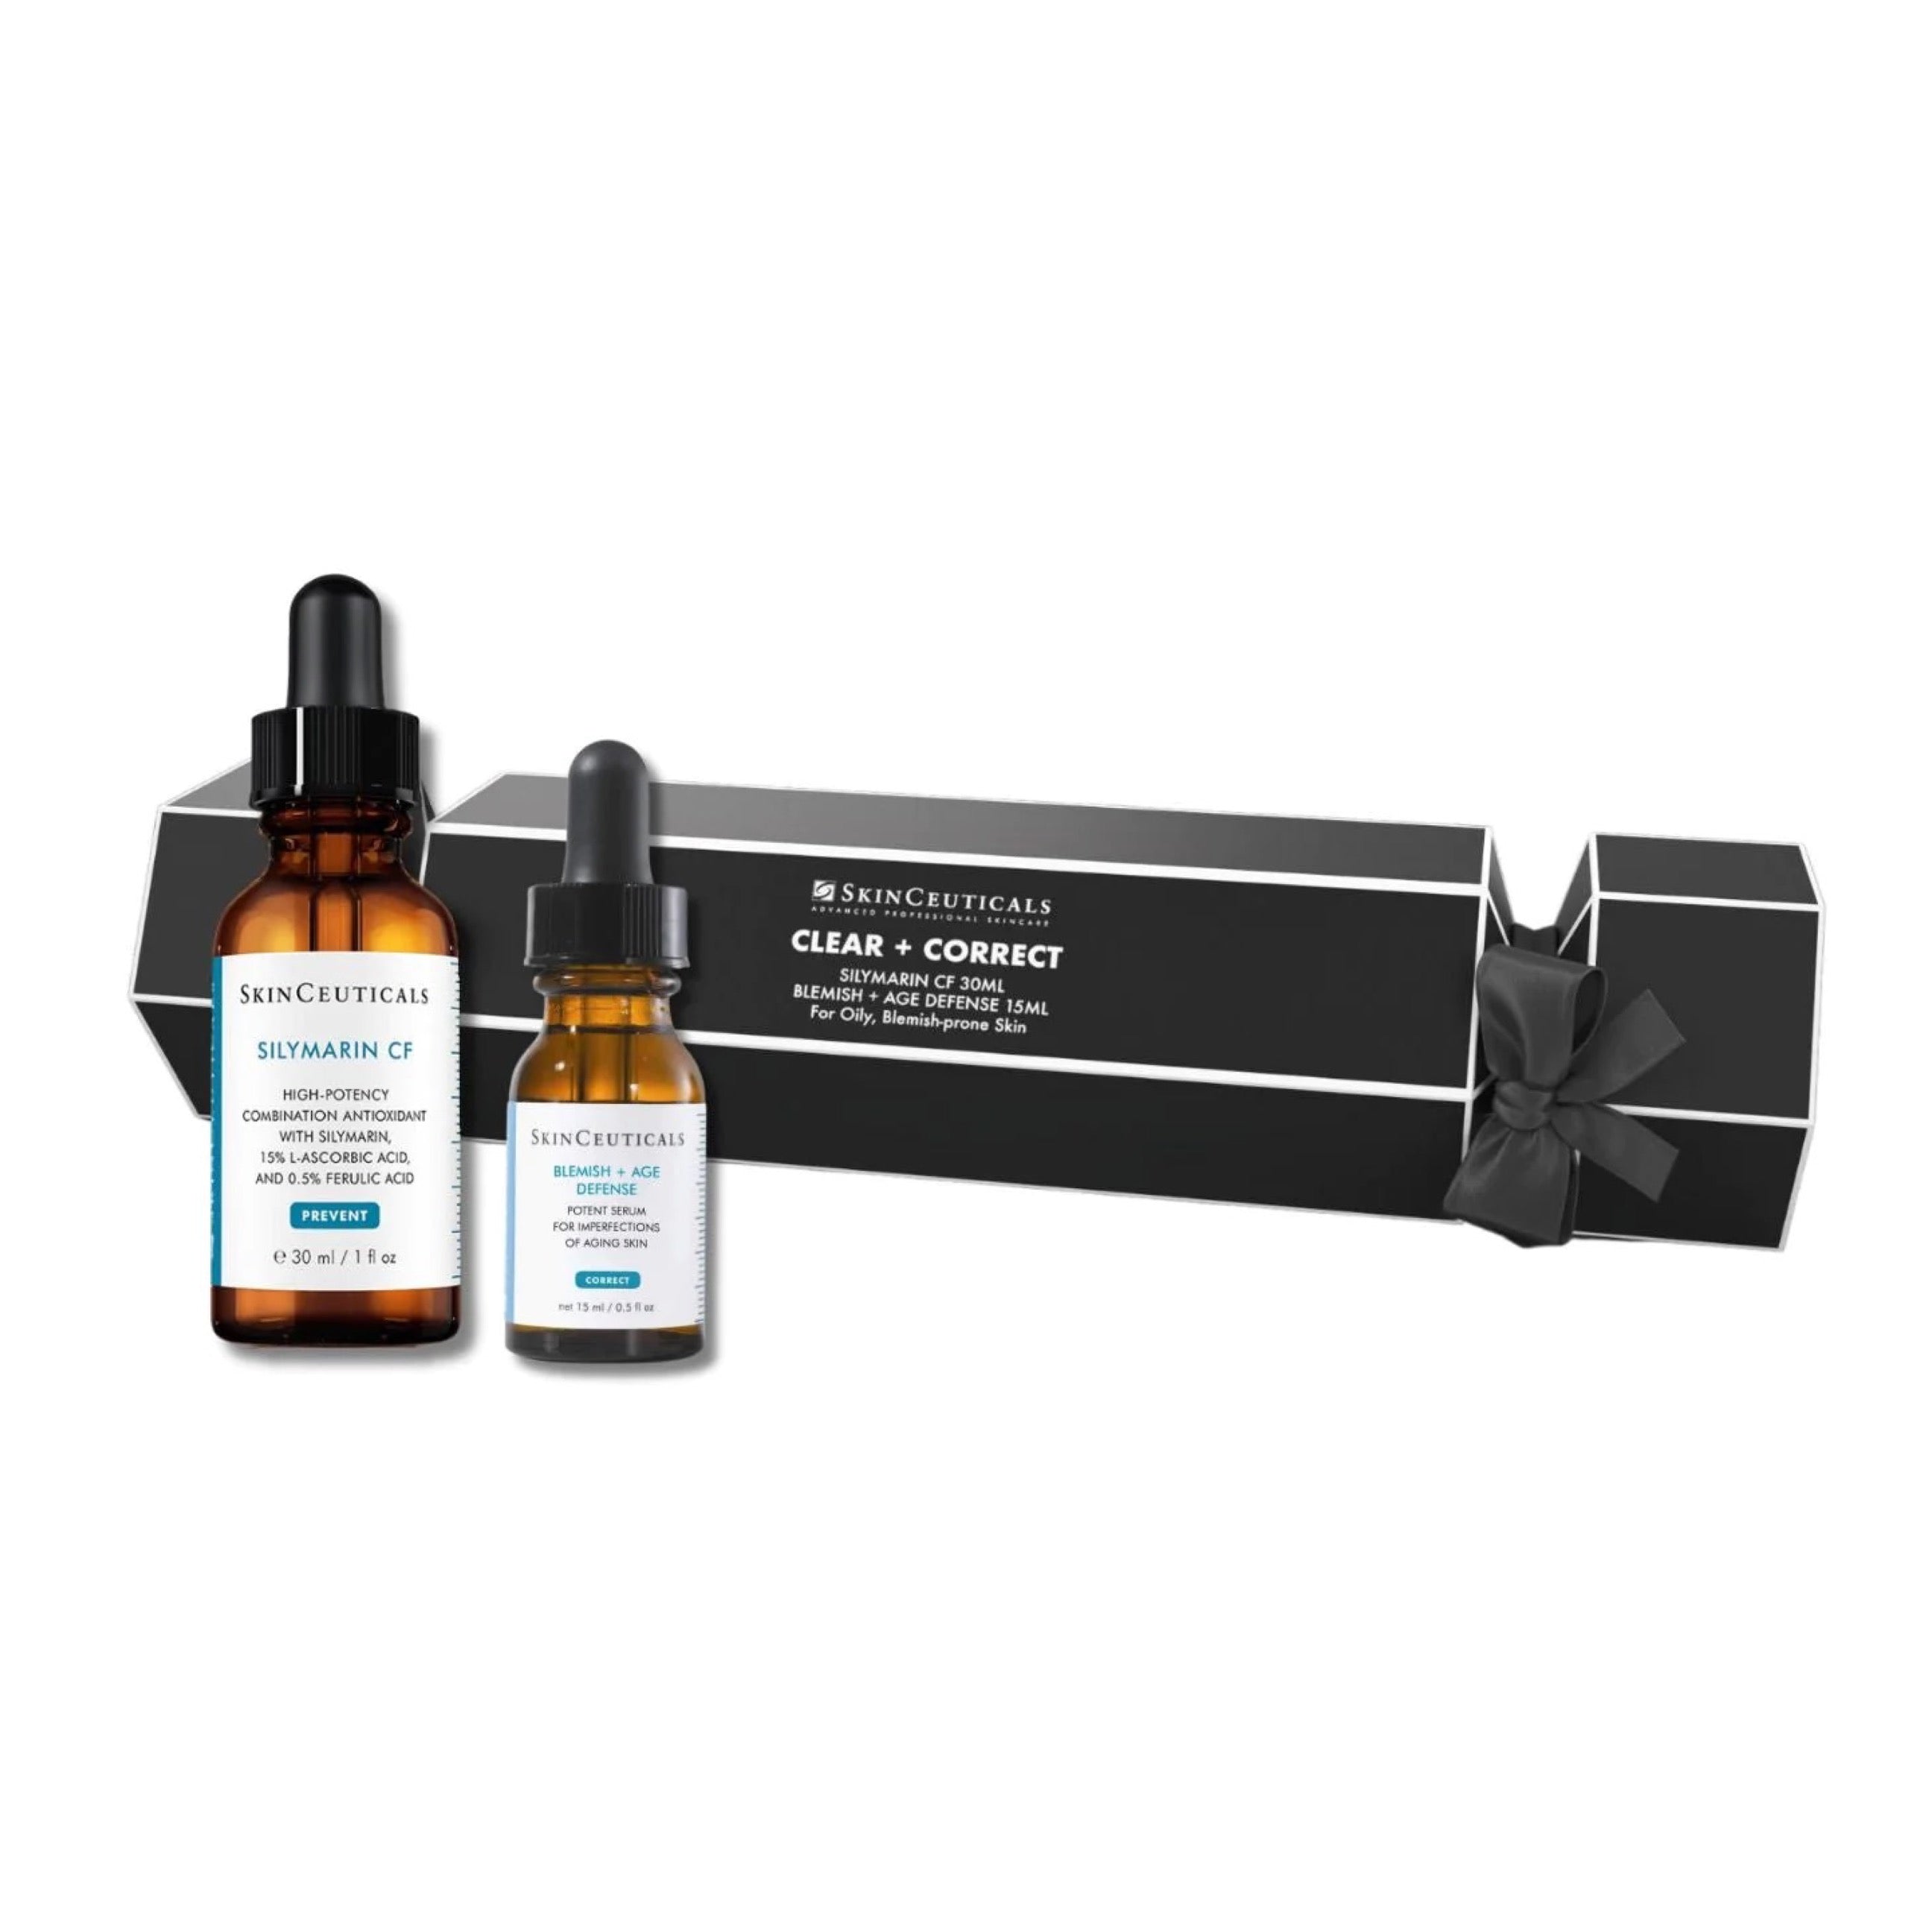 SkinCeuticals Clear & Correct Luxury Cracker (save €40)